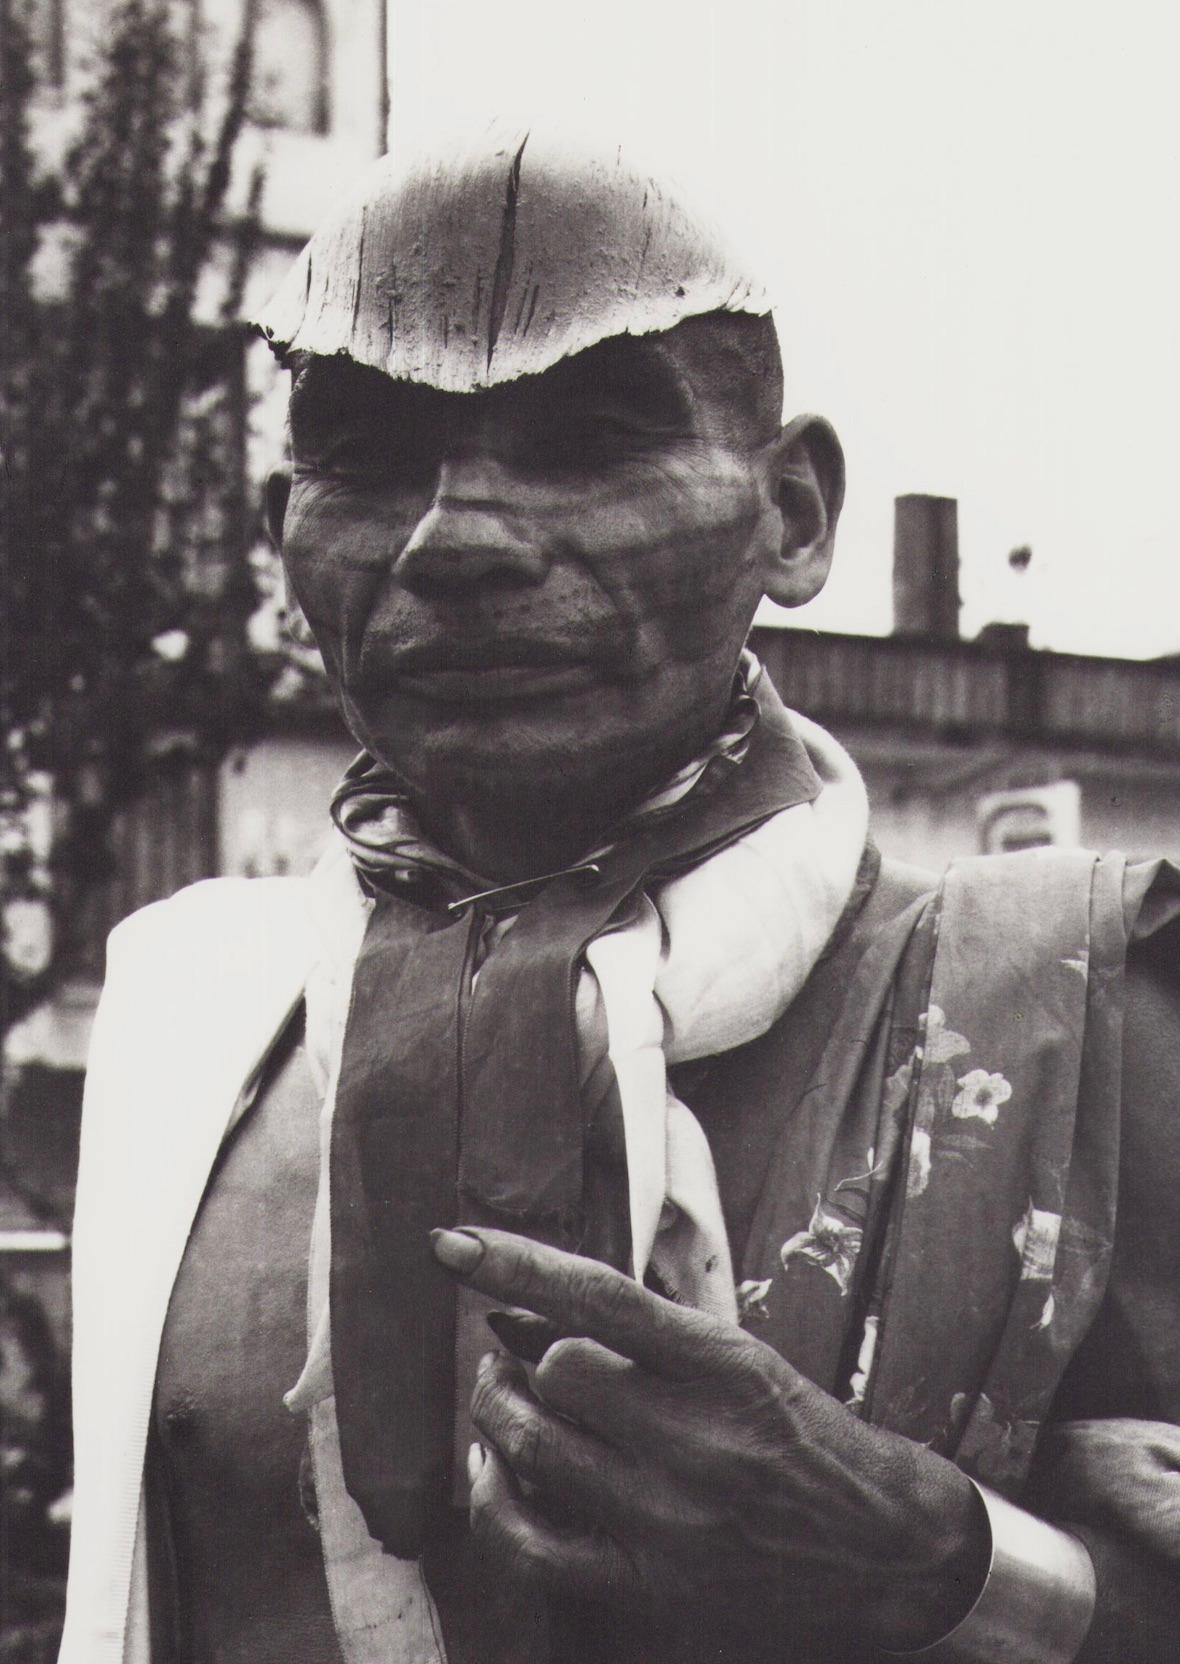 Ecuador, Indigenous Man, Black and White Photography, 1960s, 29, 1 x 23, 2 cm For Sale 1